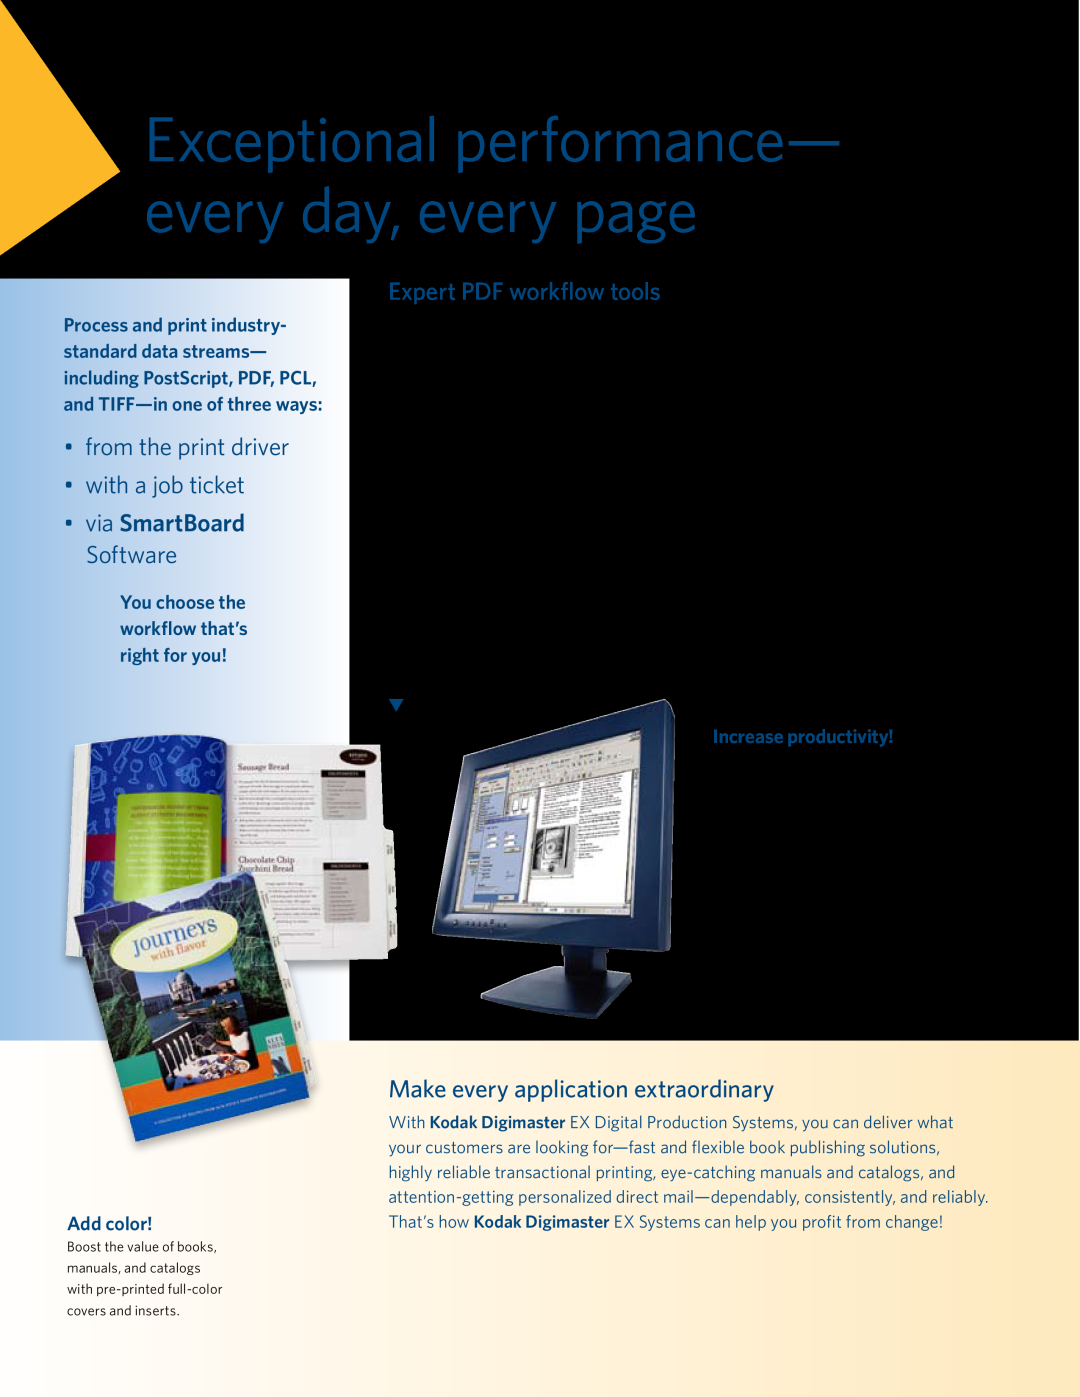 Kodak All in One Printer manual Exceptional performance- every day, every page, from the print driver with a job ticket 